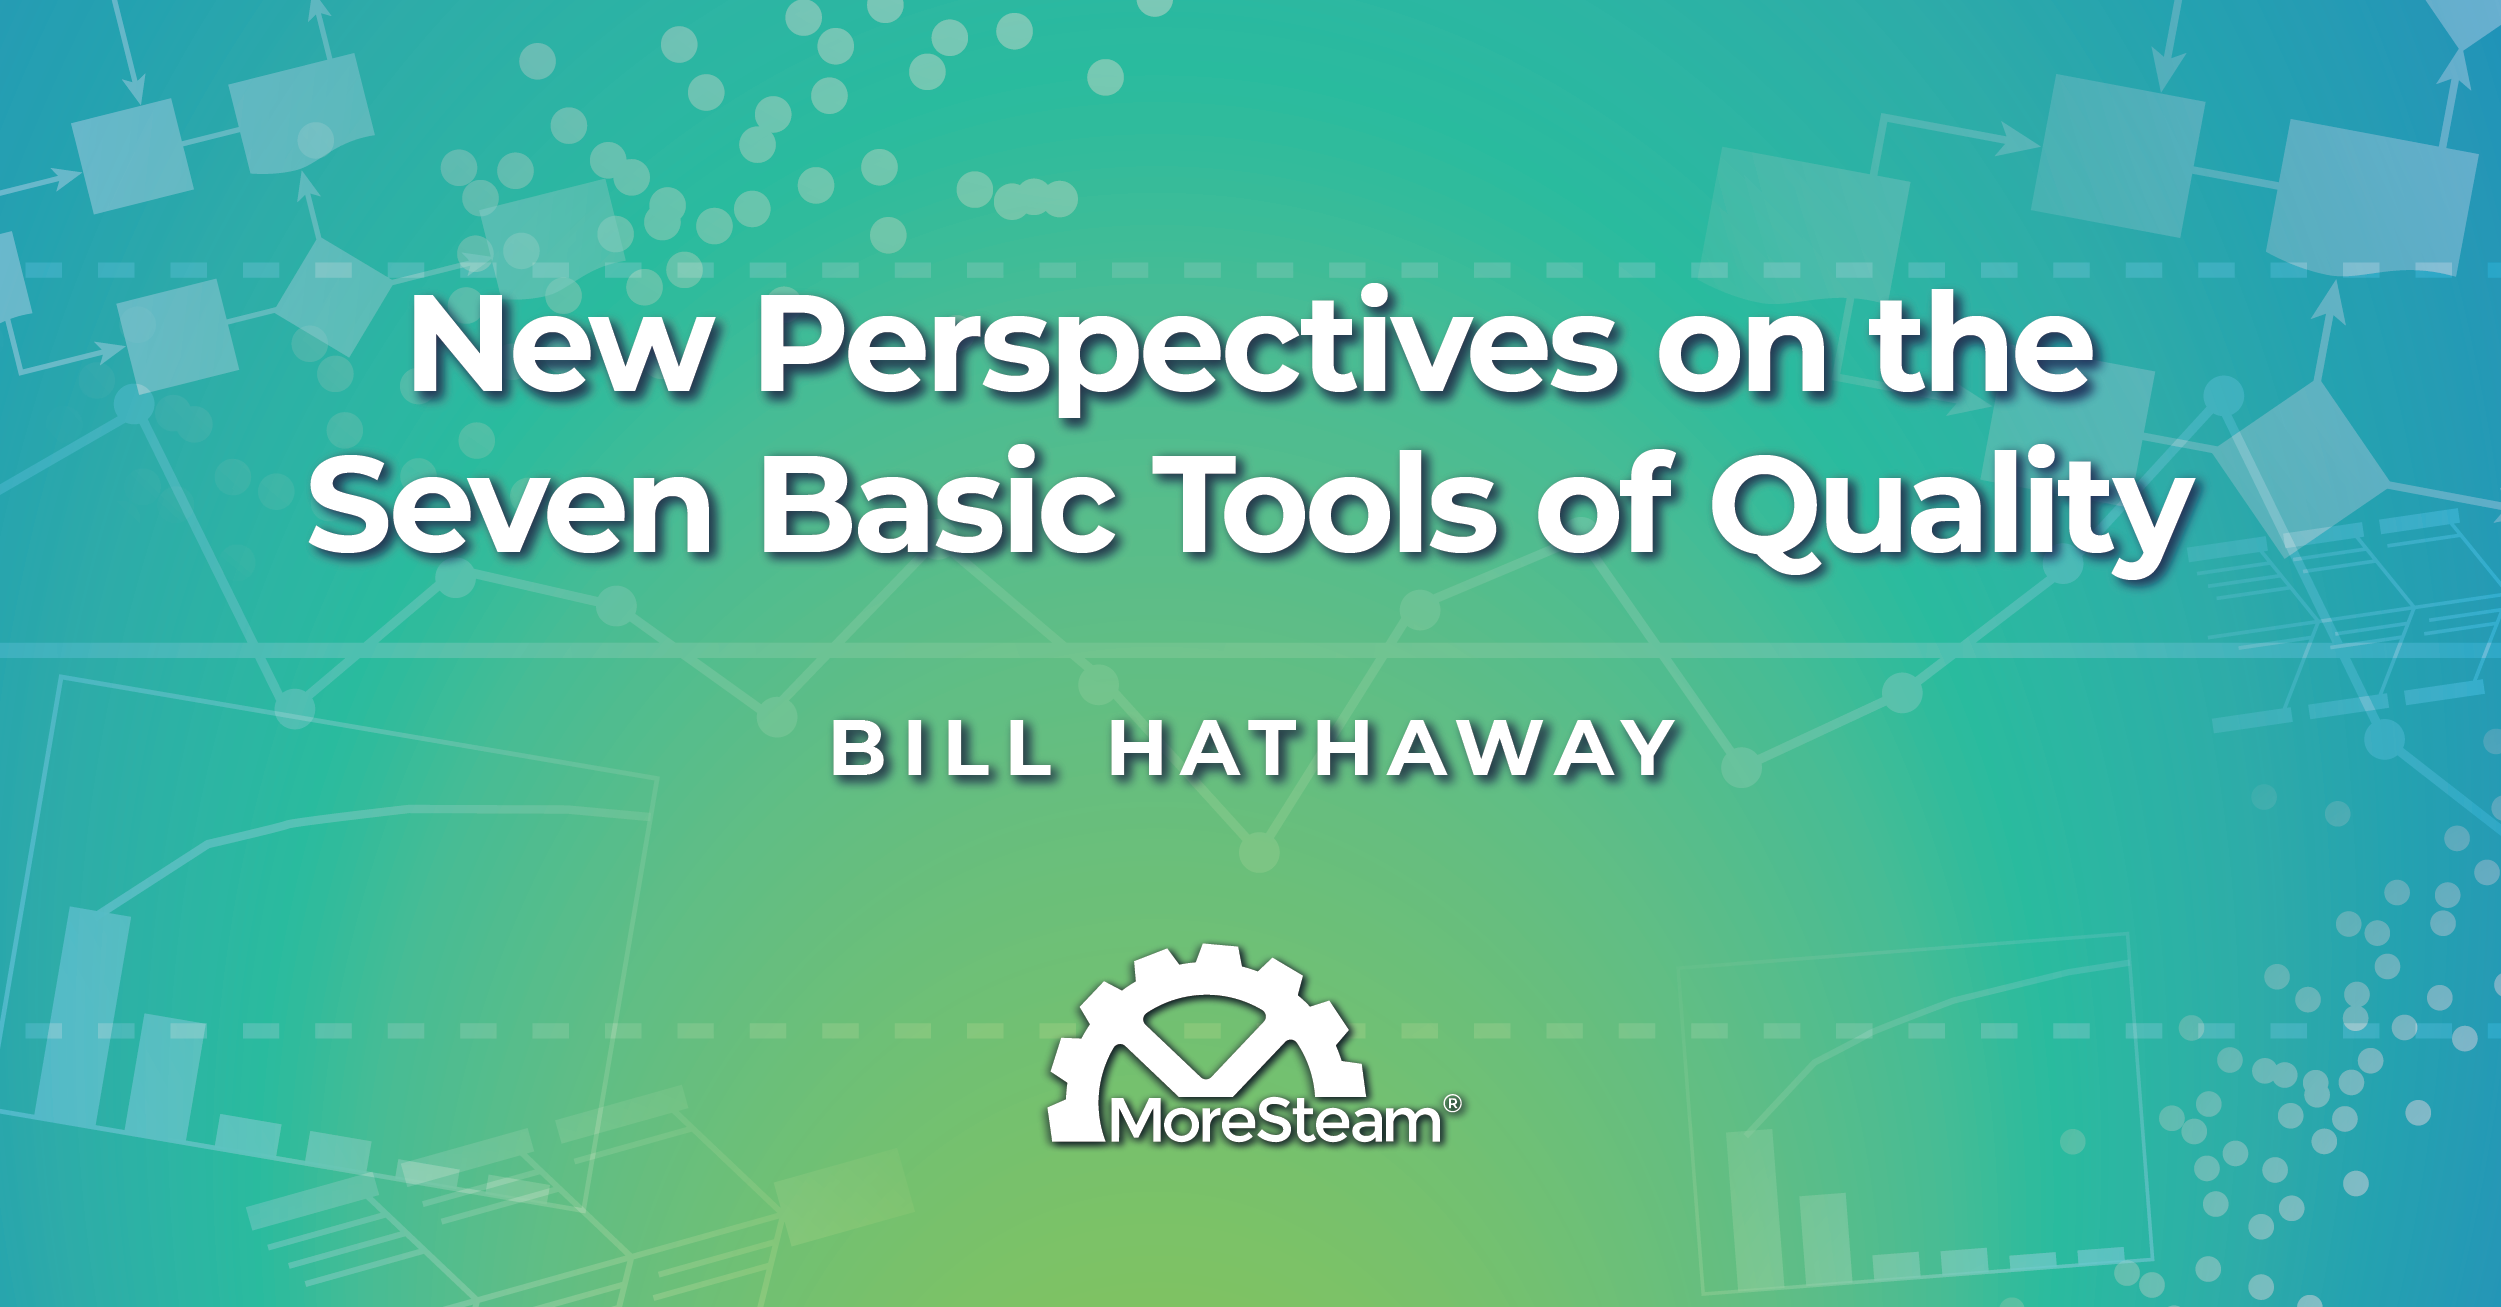 New Perspectives on the Seven Basic Tools of Quality